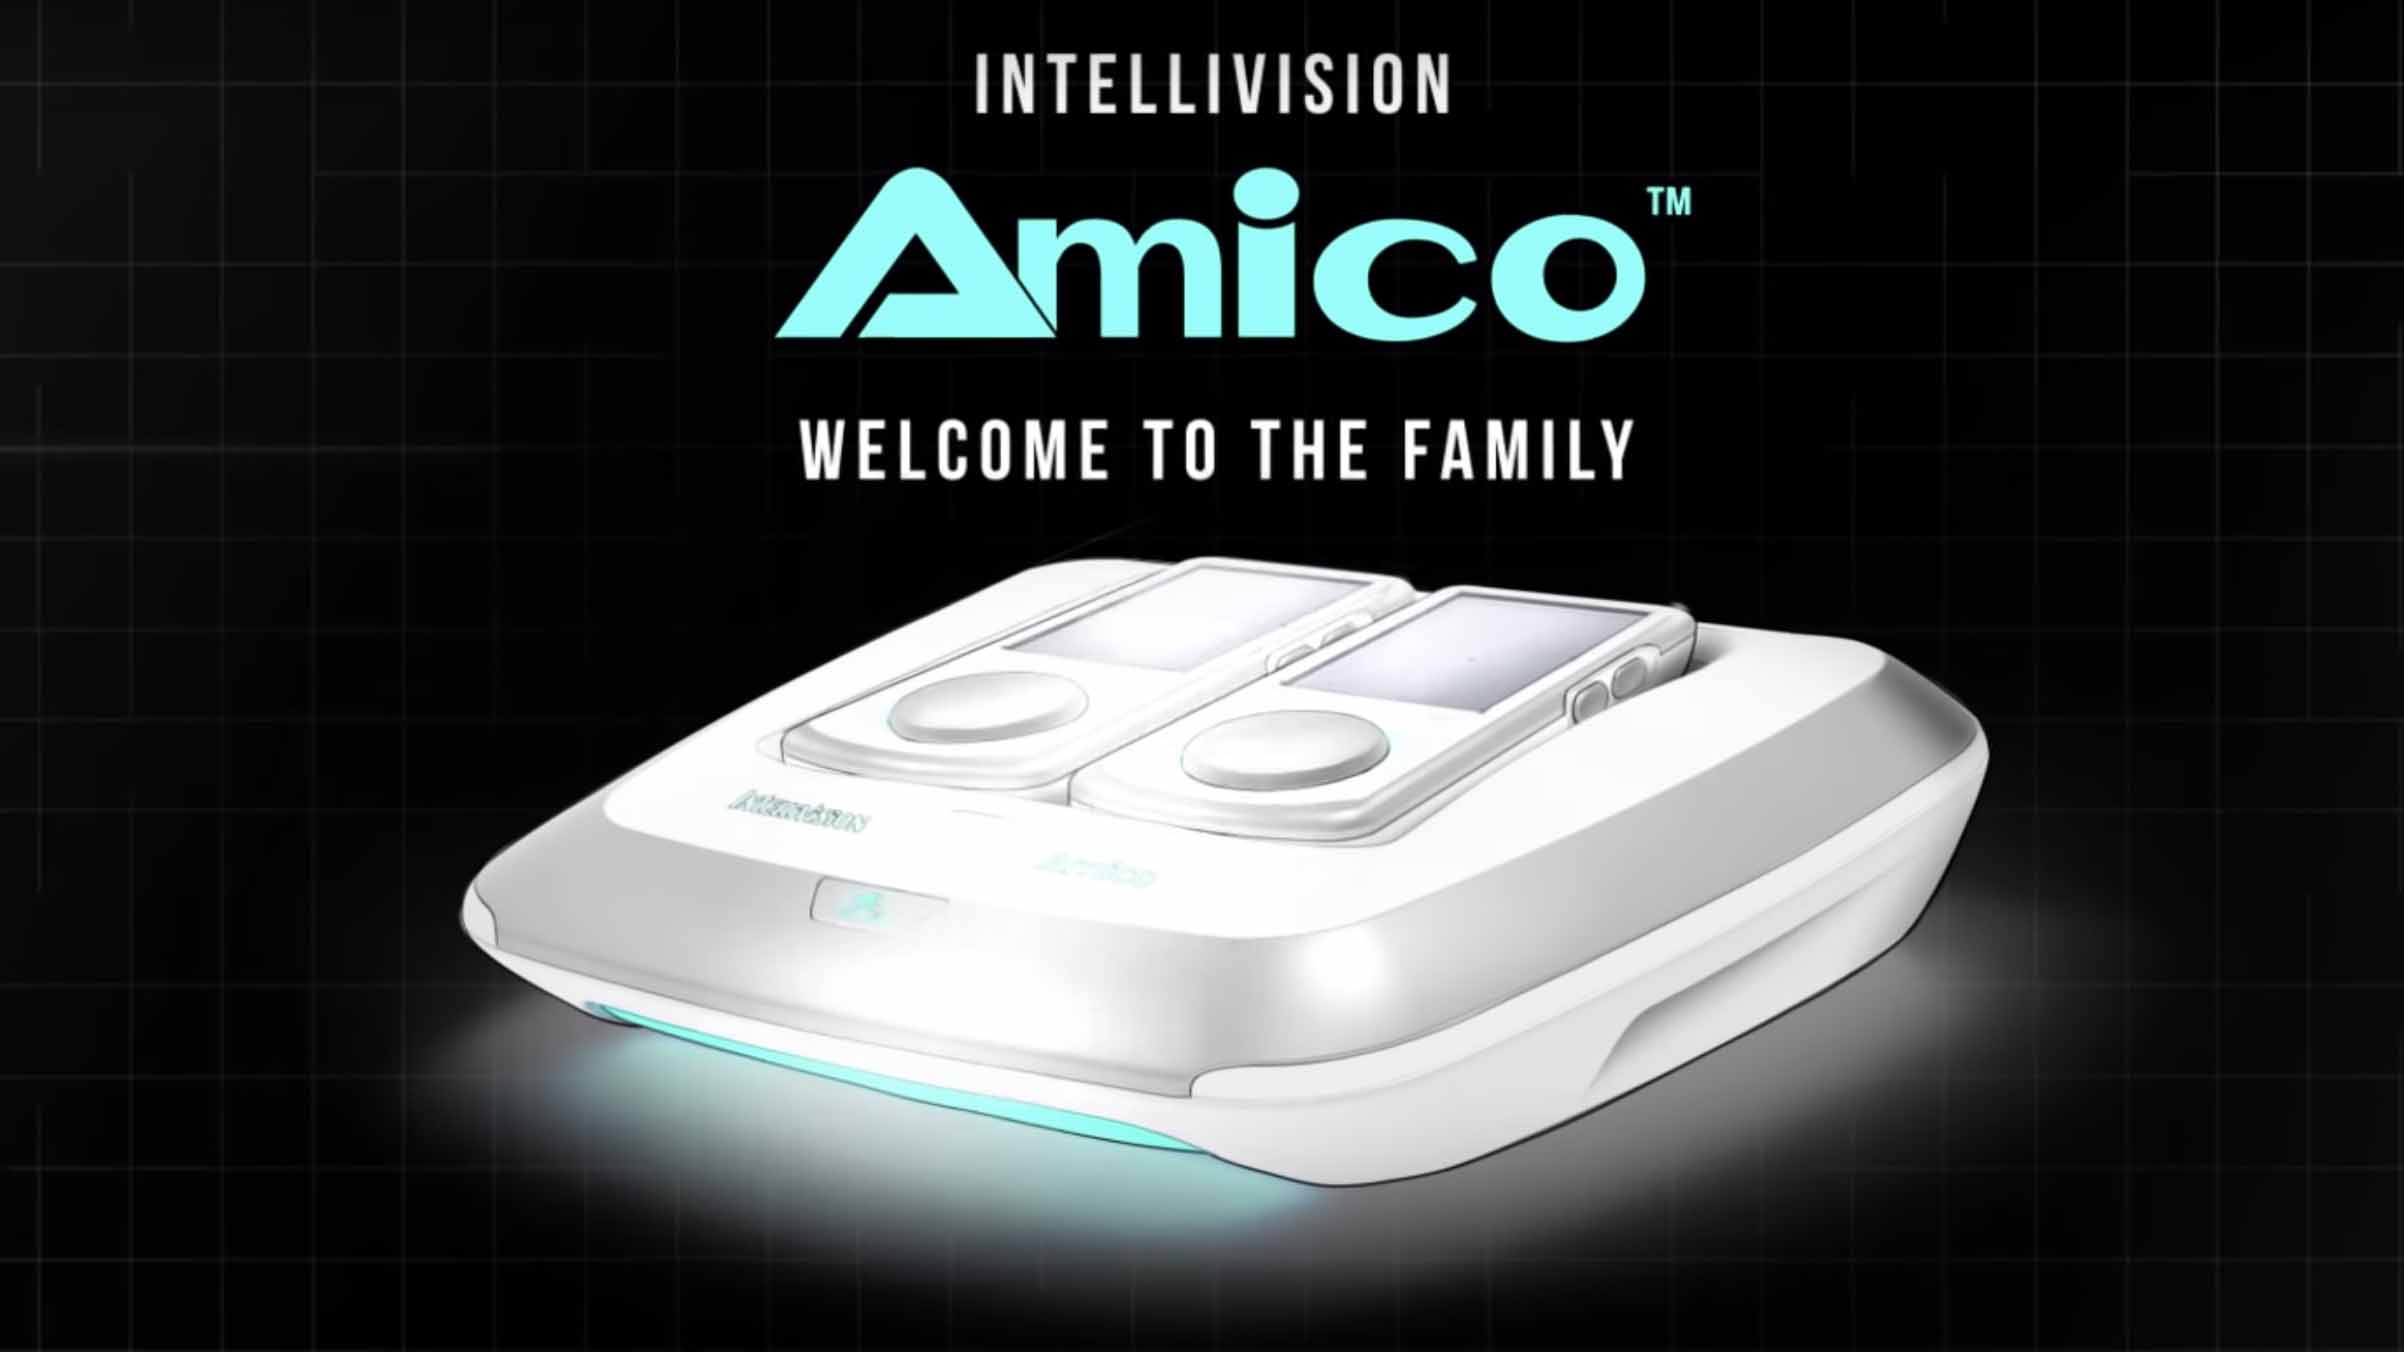 The Intellivision Amico Is The Most Unnecessary Console Ever